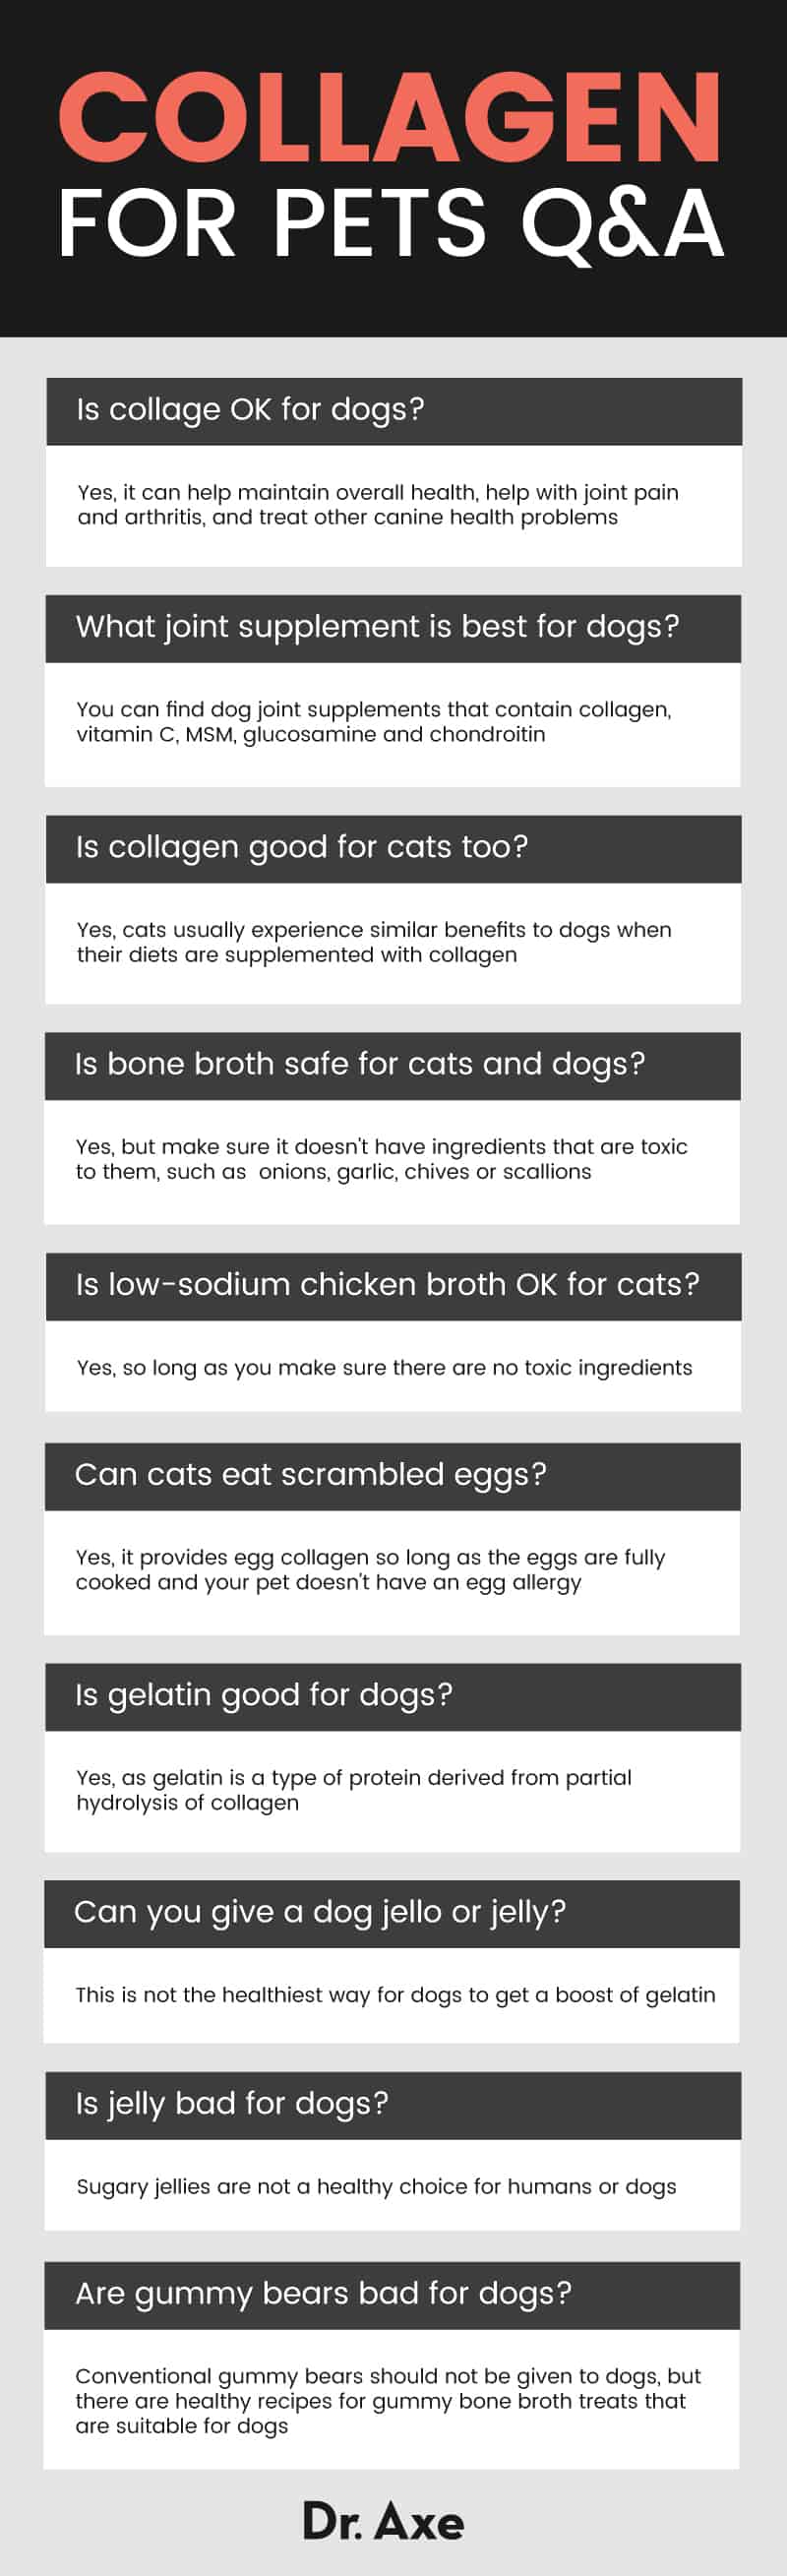 Collagen for dogs - Dr. Axe